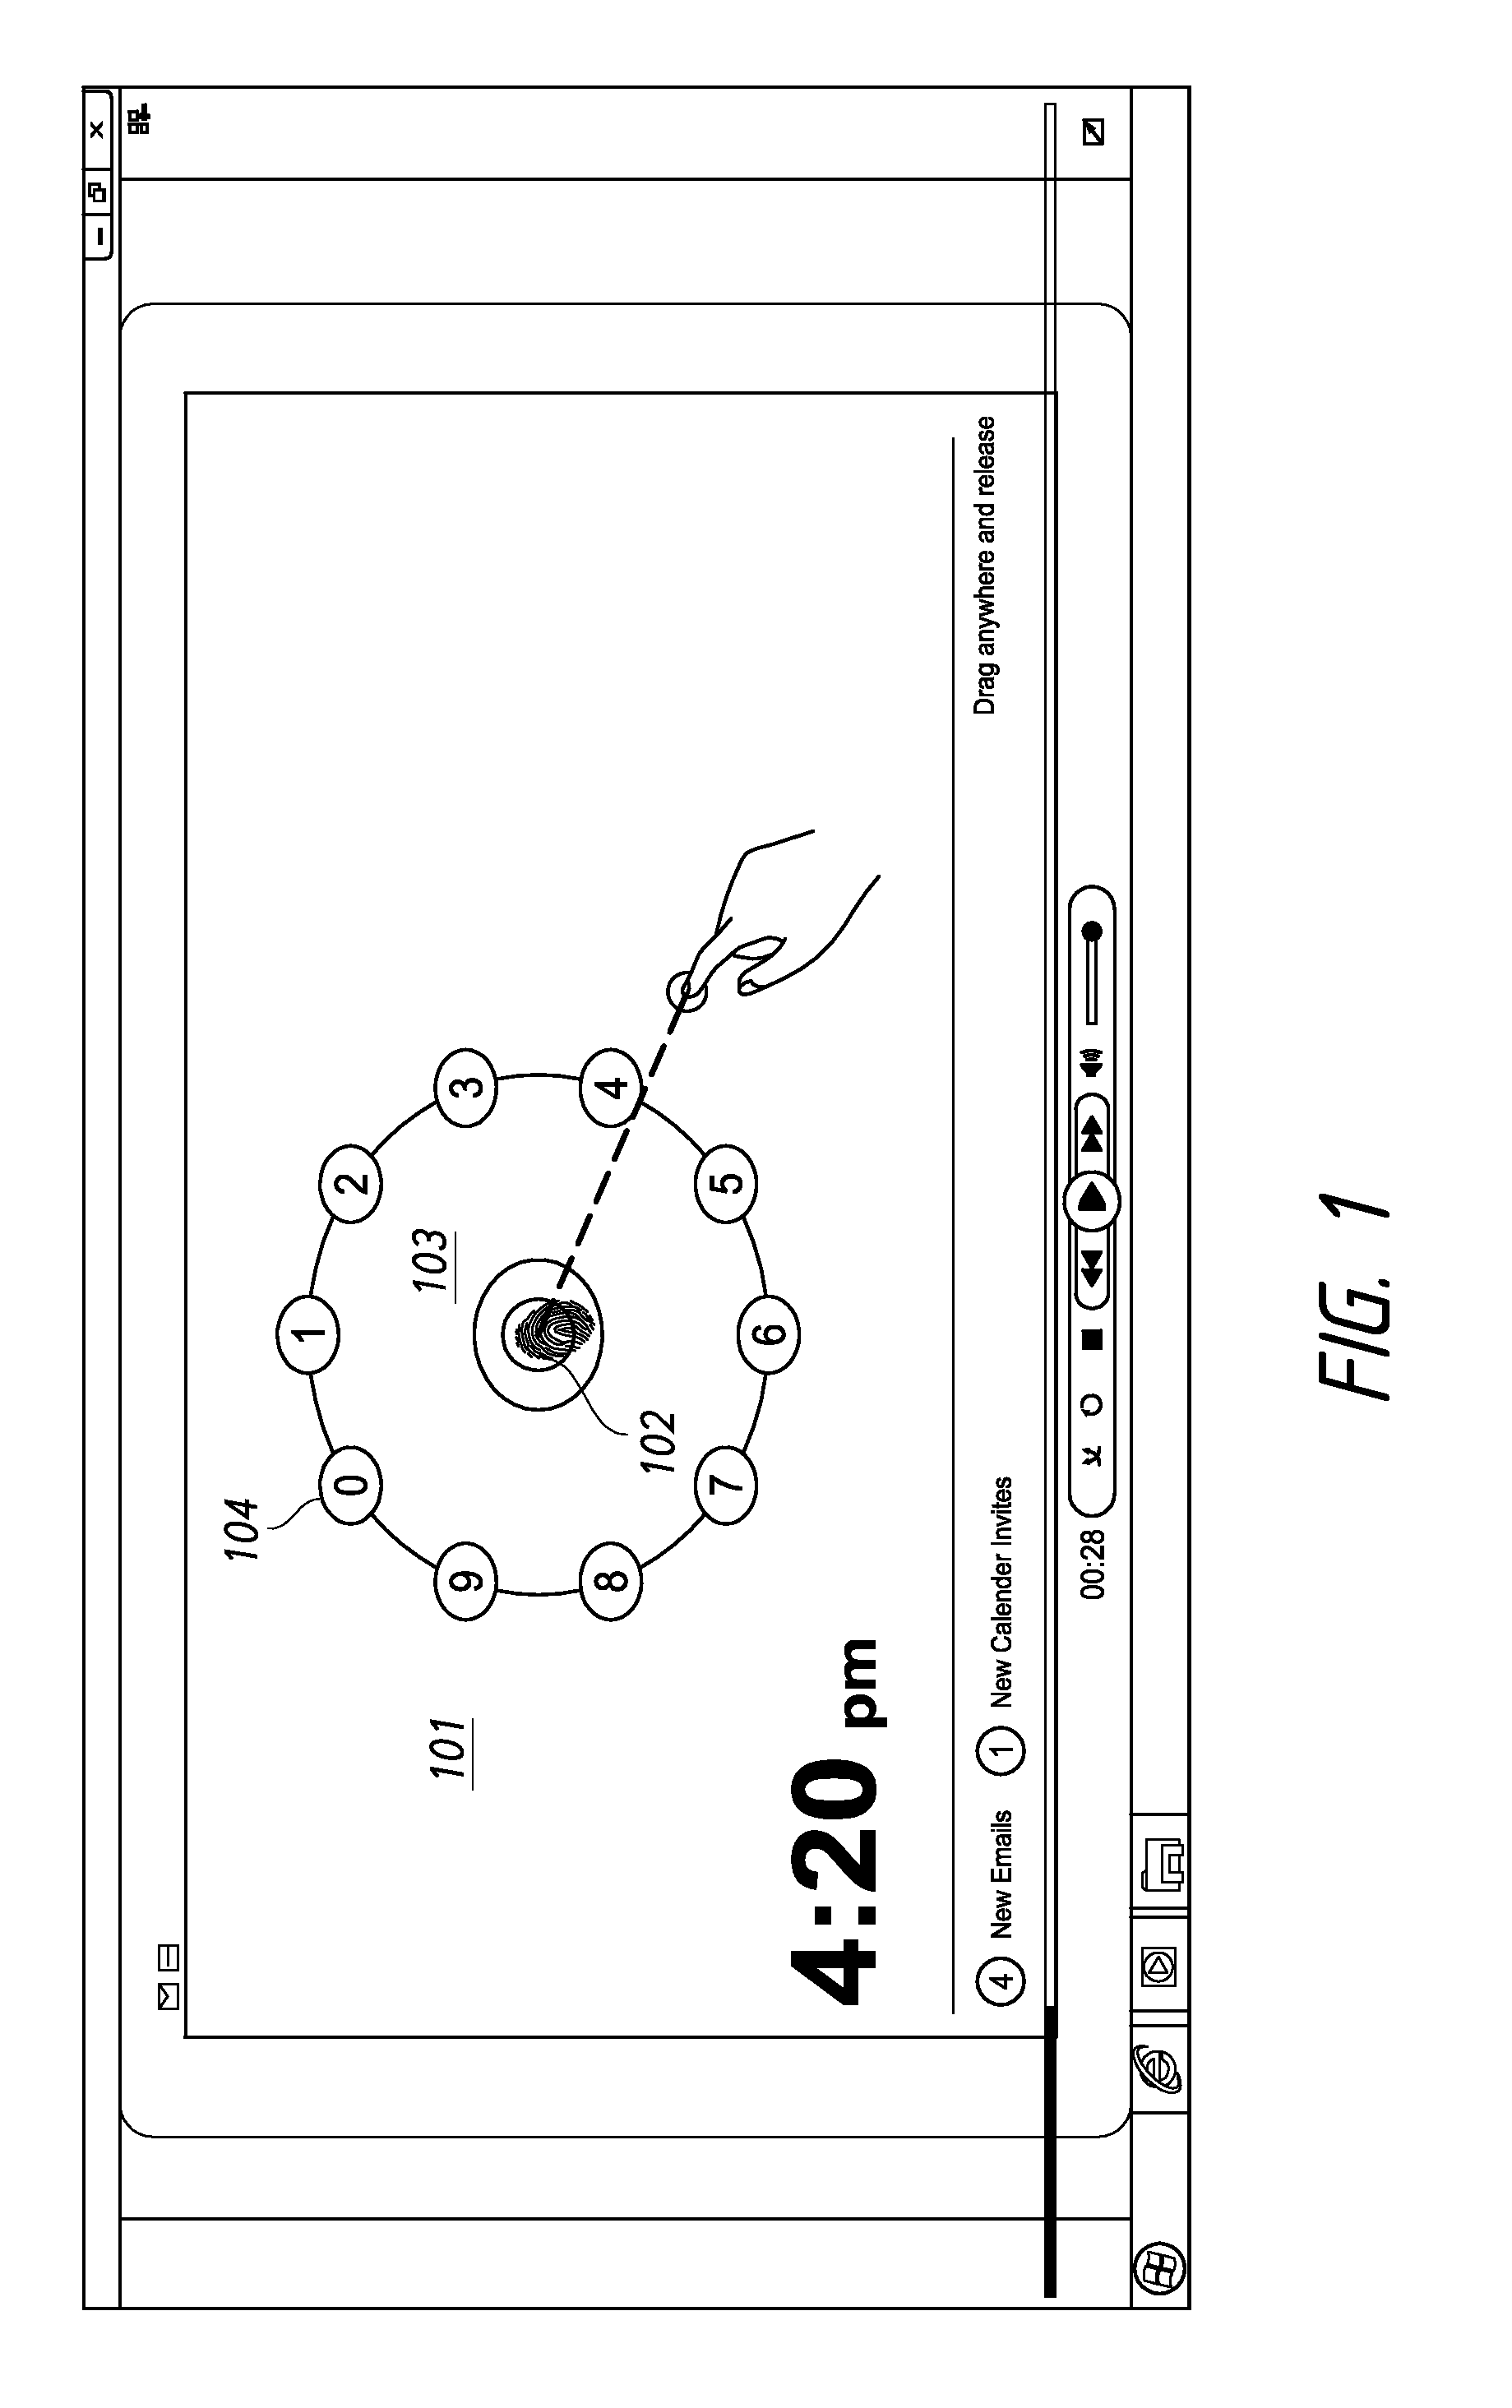 User interface, touch-controlled device and method for authenticating a user of a touch-controlled device